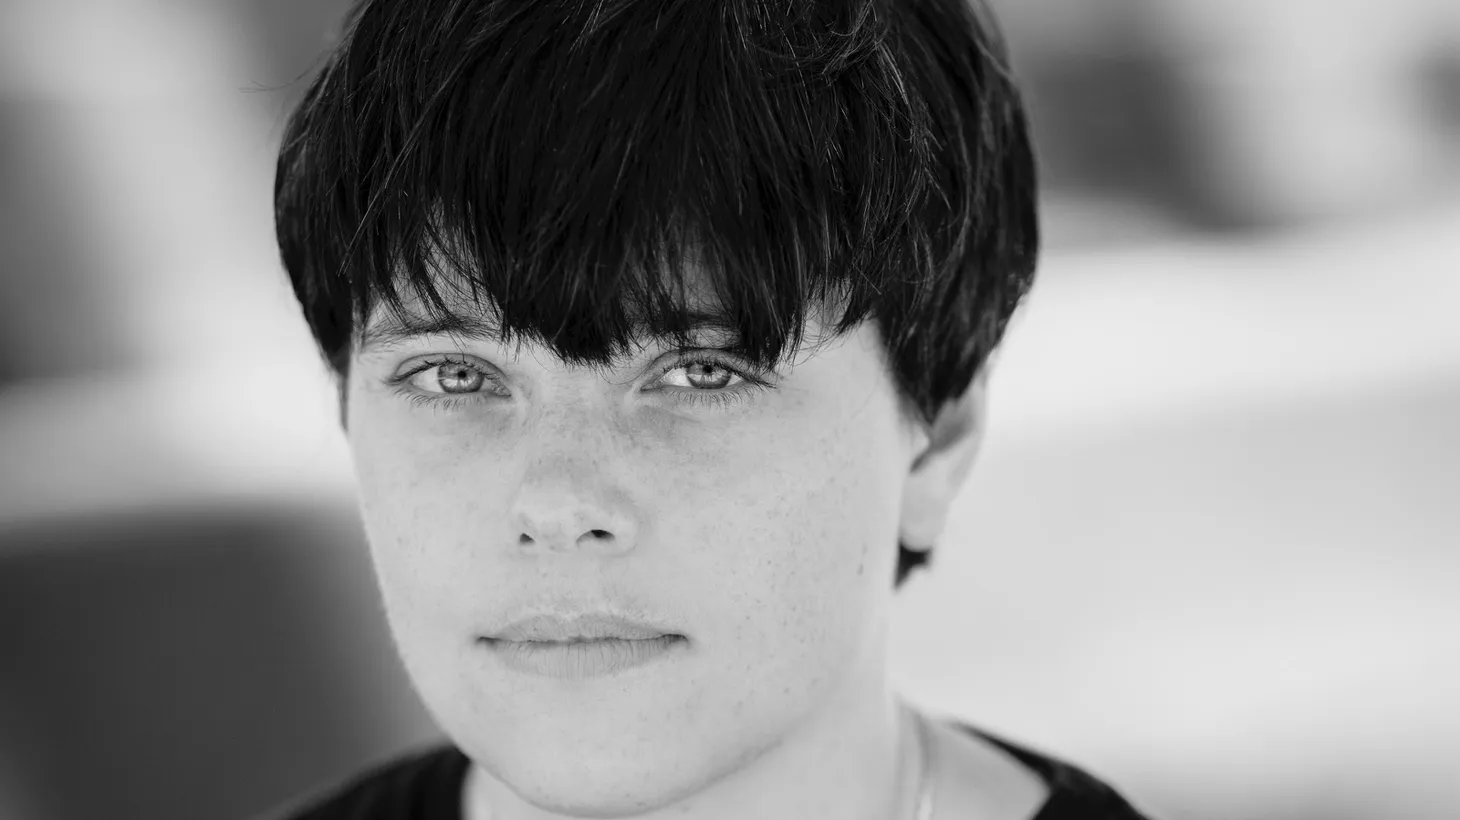 ‘Aftersun’ director Charlotte Wells says that the lyrics at the end of The xx’s “Brave for you” struck a chord with her in terms of how she thought about writing the film.